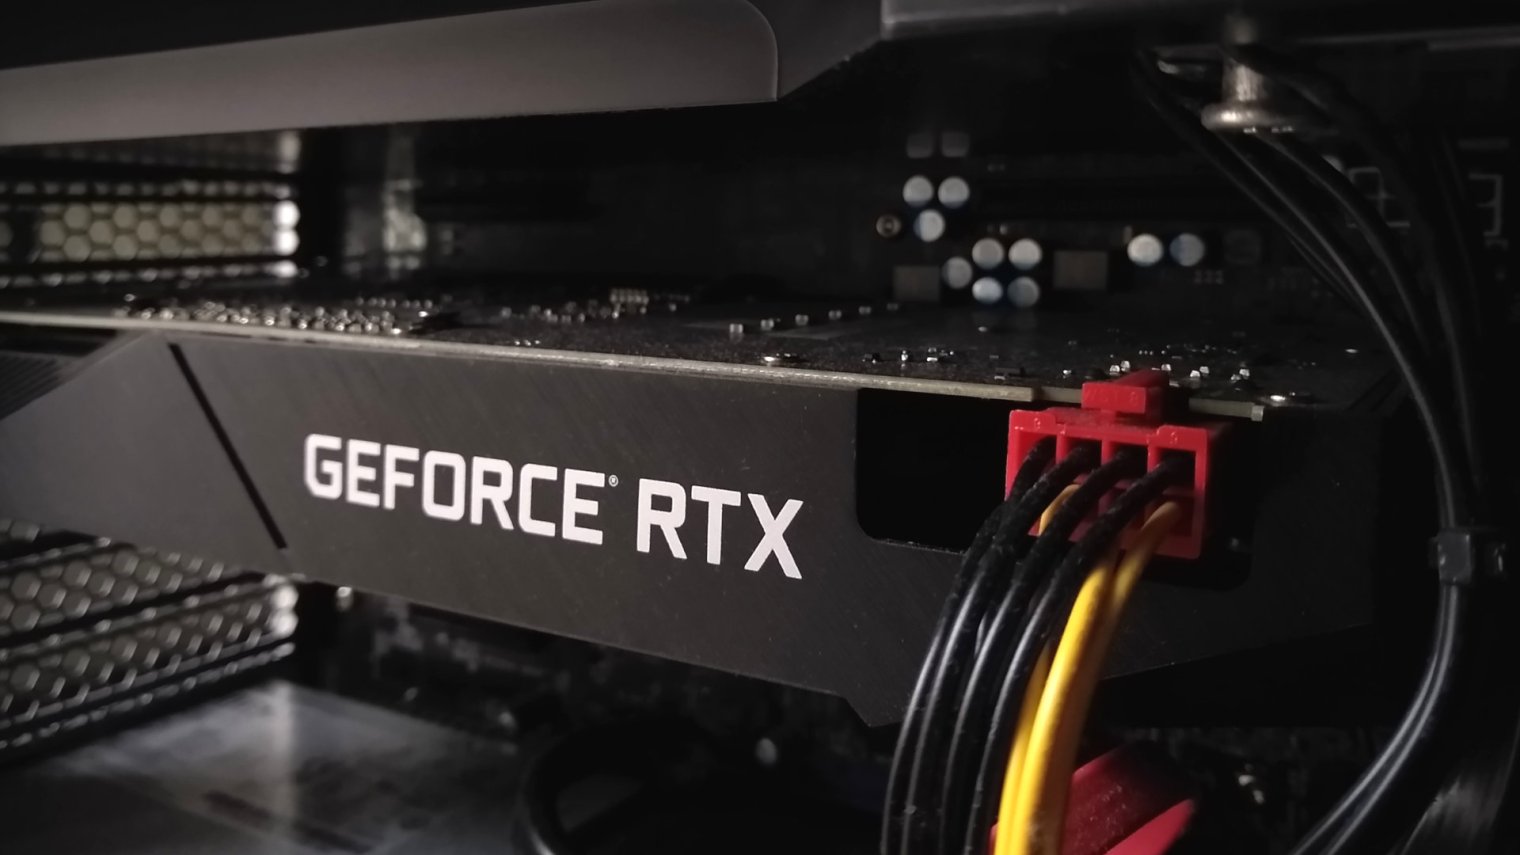 NVIDIA’s RTX cards has hardware-accelerated ray tracing, that may has a huge potential for real-time arch-viz in future